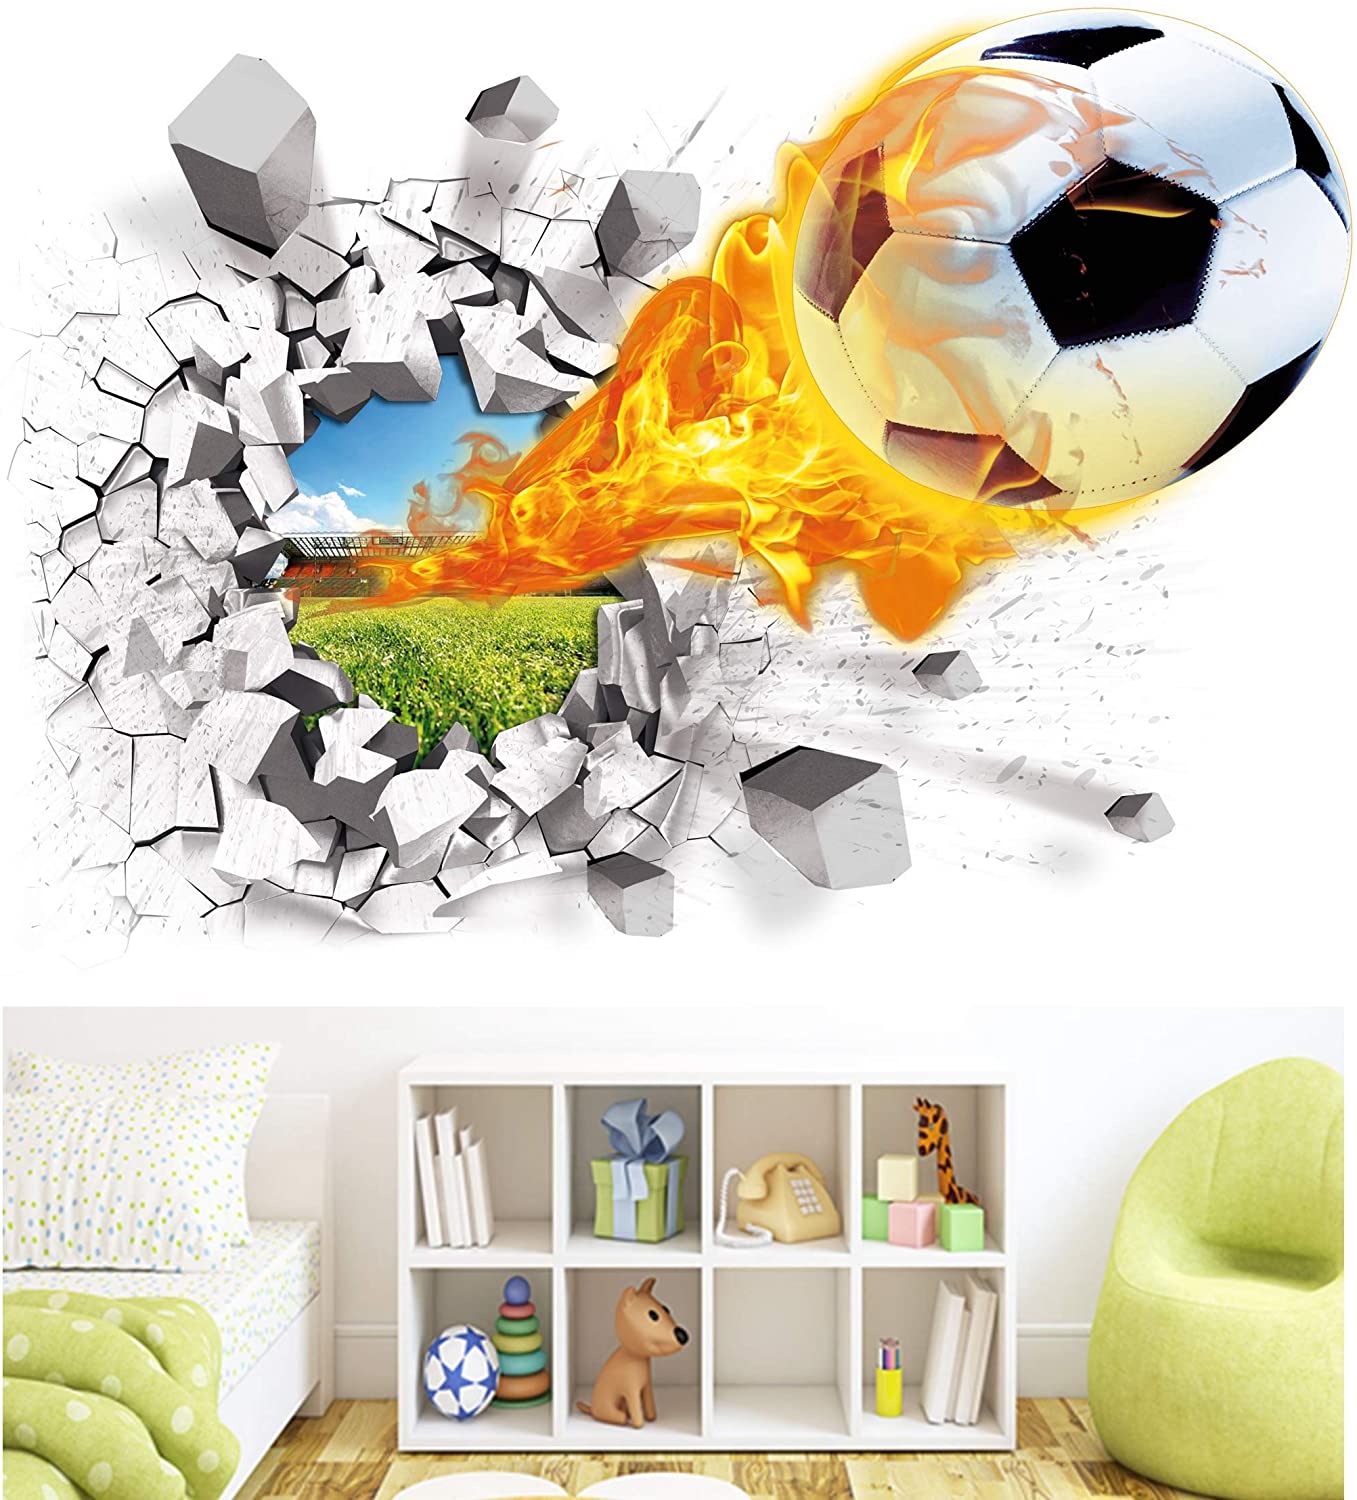 U-Shark® Soccer Wall Decals for Bedroom 3D Soccer Wall Stickers for Boys Rooms Soccer Wall Décor Stickers Removable Vinyl Sports Decal Wall Murals Decoration Nursery Christmas Birthday Gifts